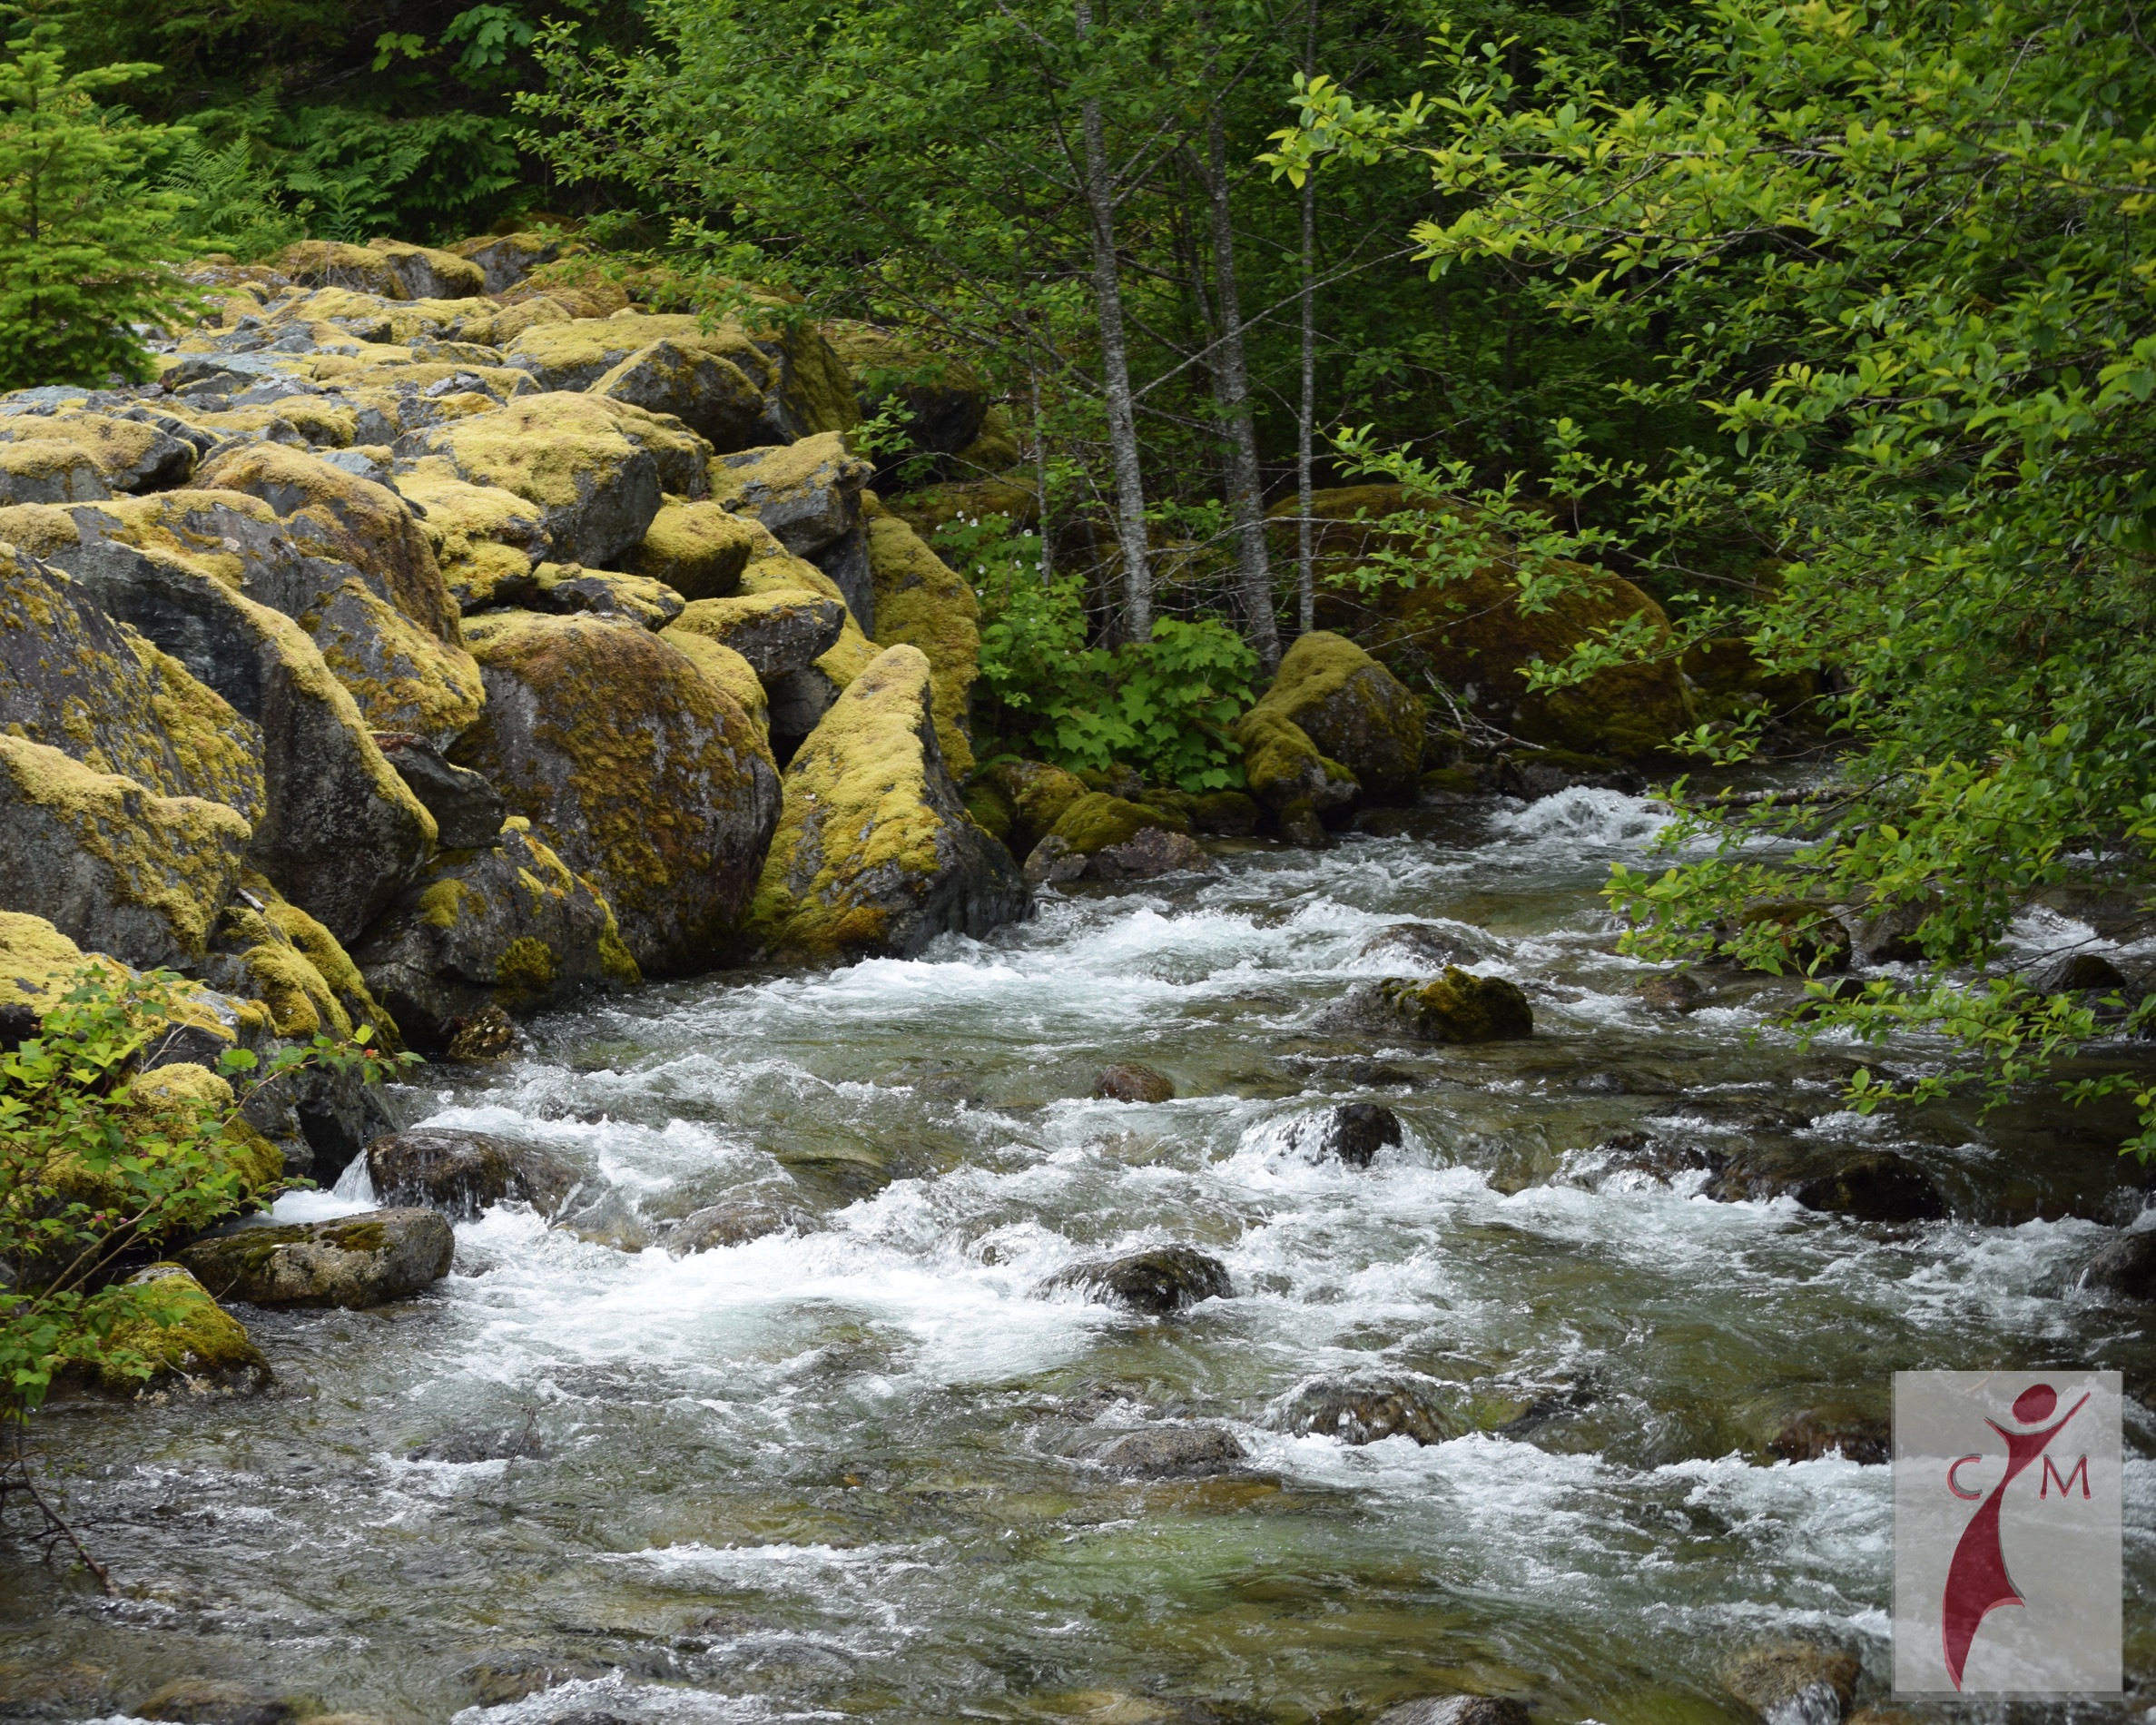 Skagit River with boulders and trees